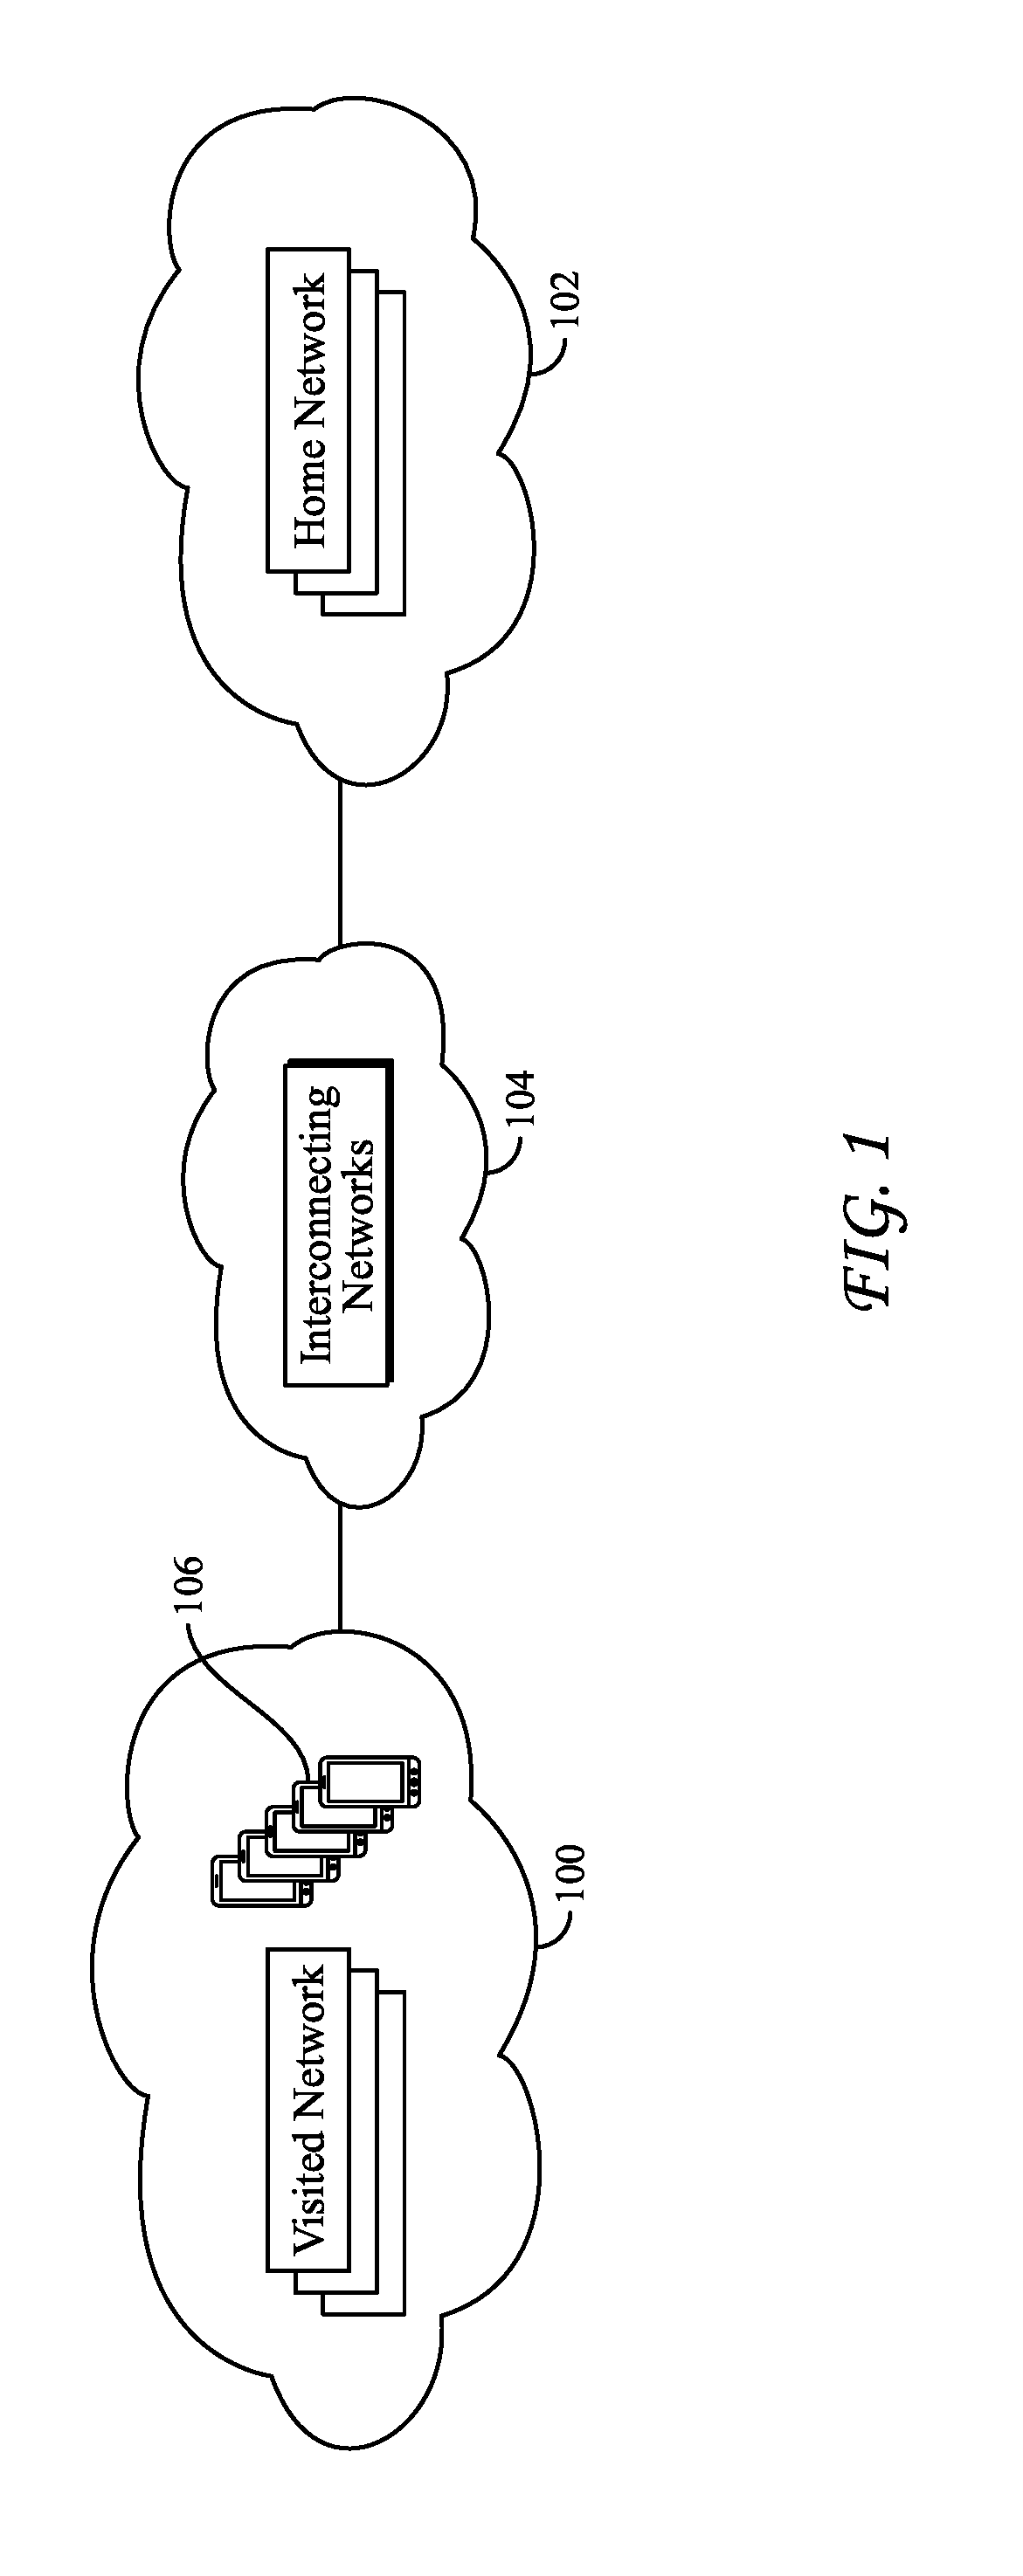 Distributed ledger system for management and implementation of exchanges of wireless services between wireless service providers